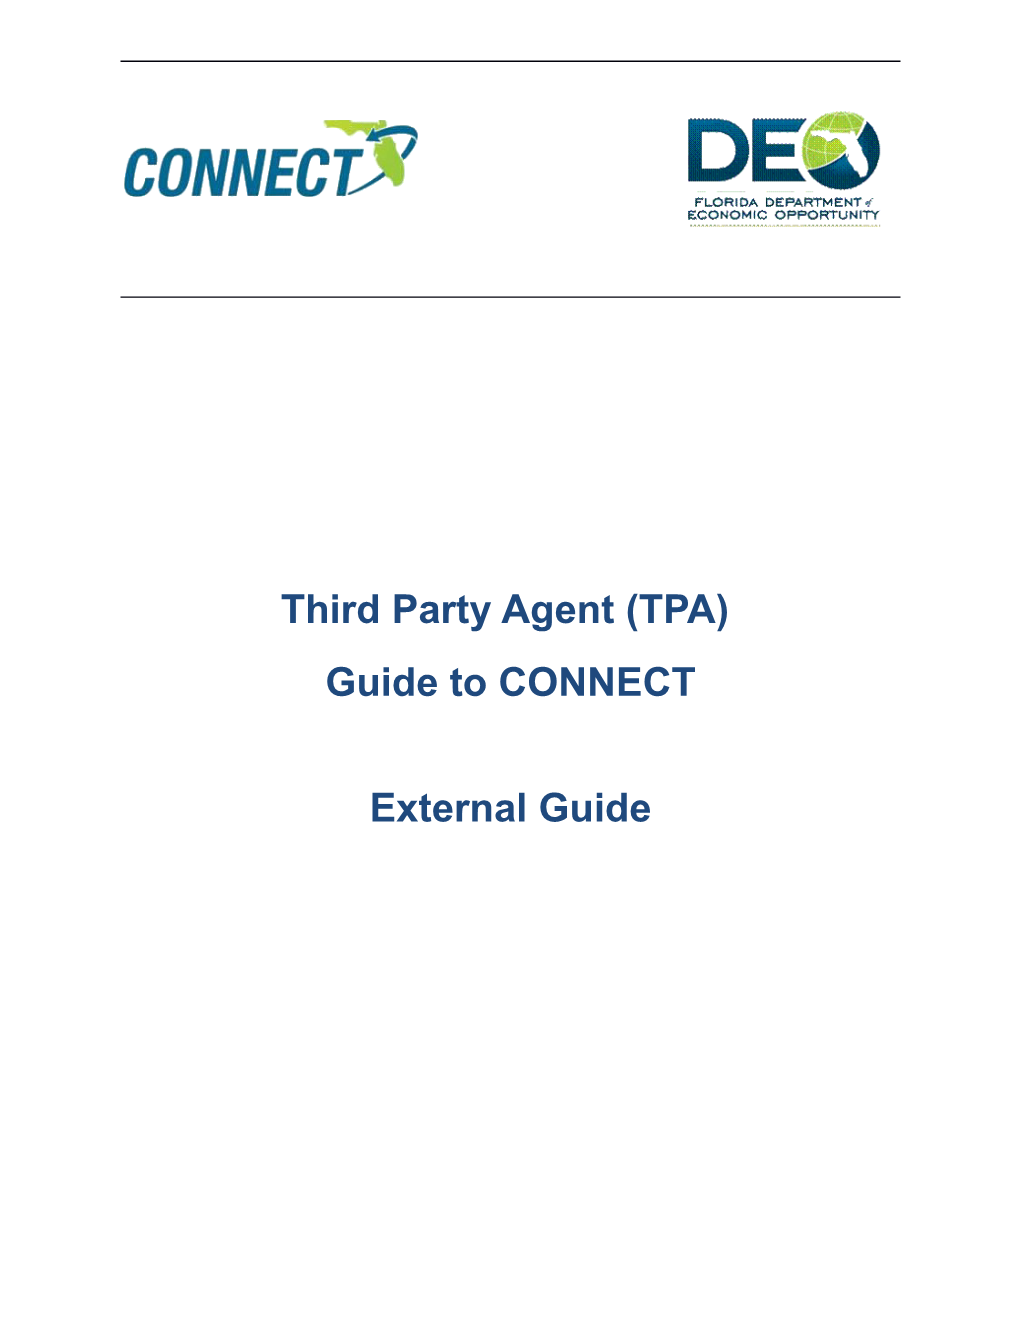 Third Party Administrator (TPA) Guide to CONNECT